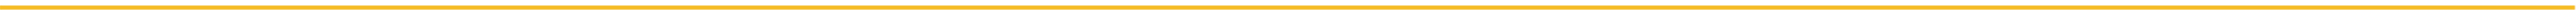 YELLOW (1).png